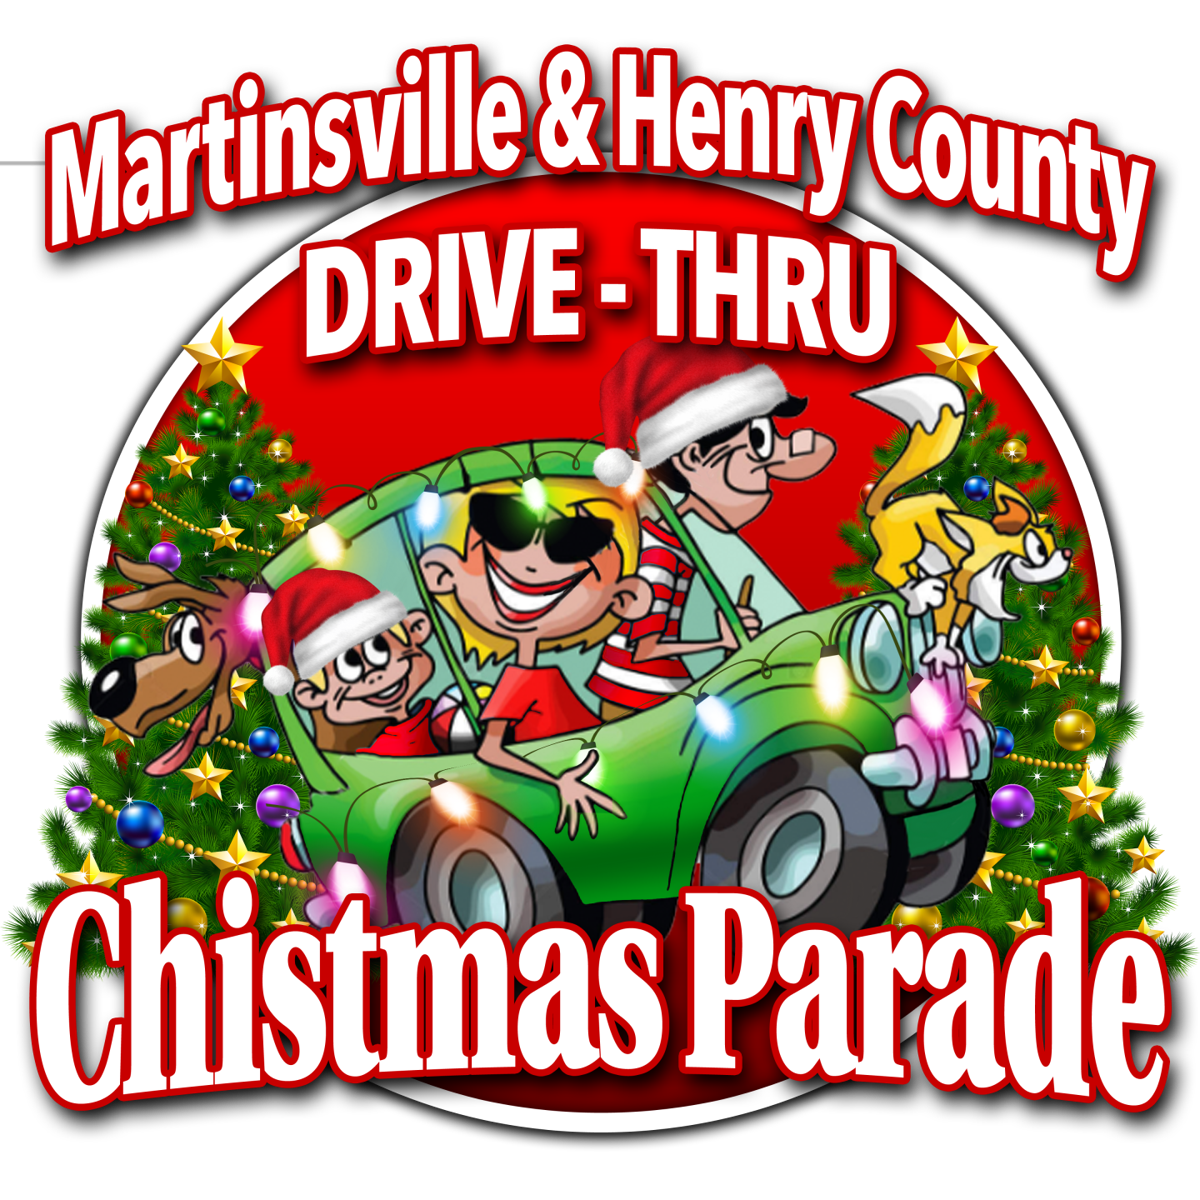 Martinsville's Christmas parade open to all